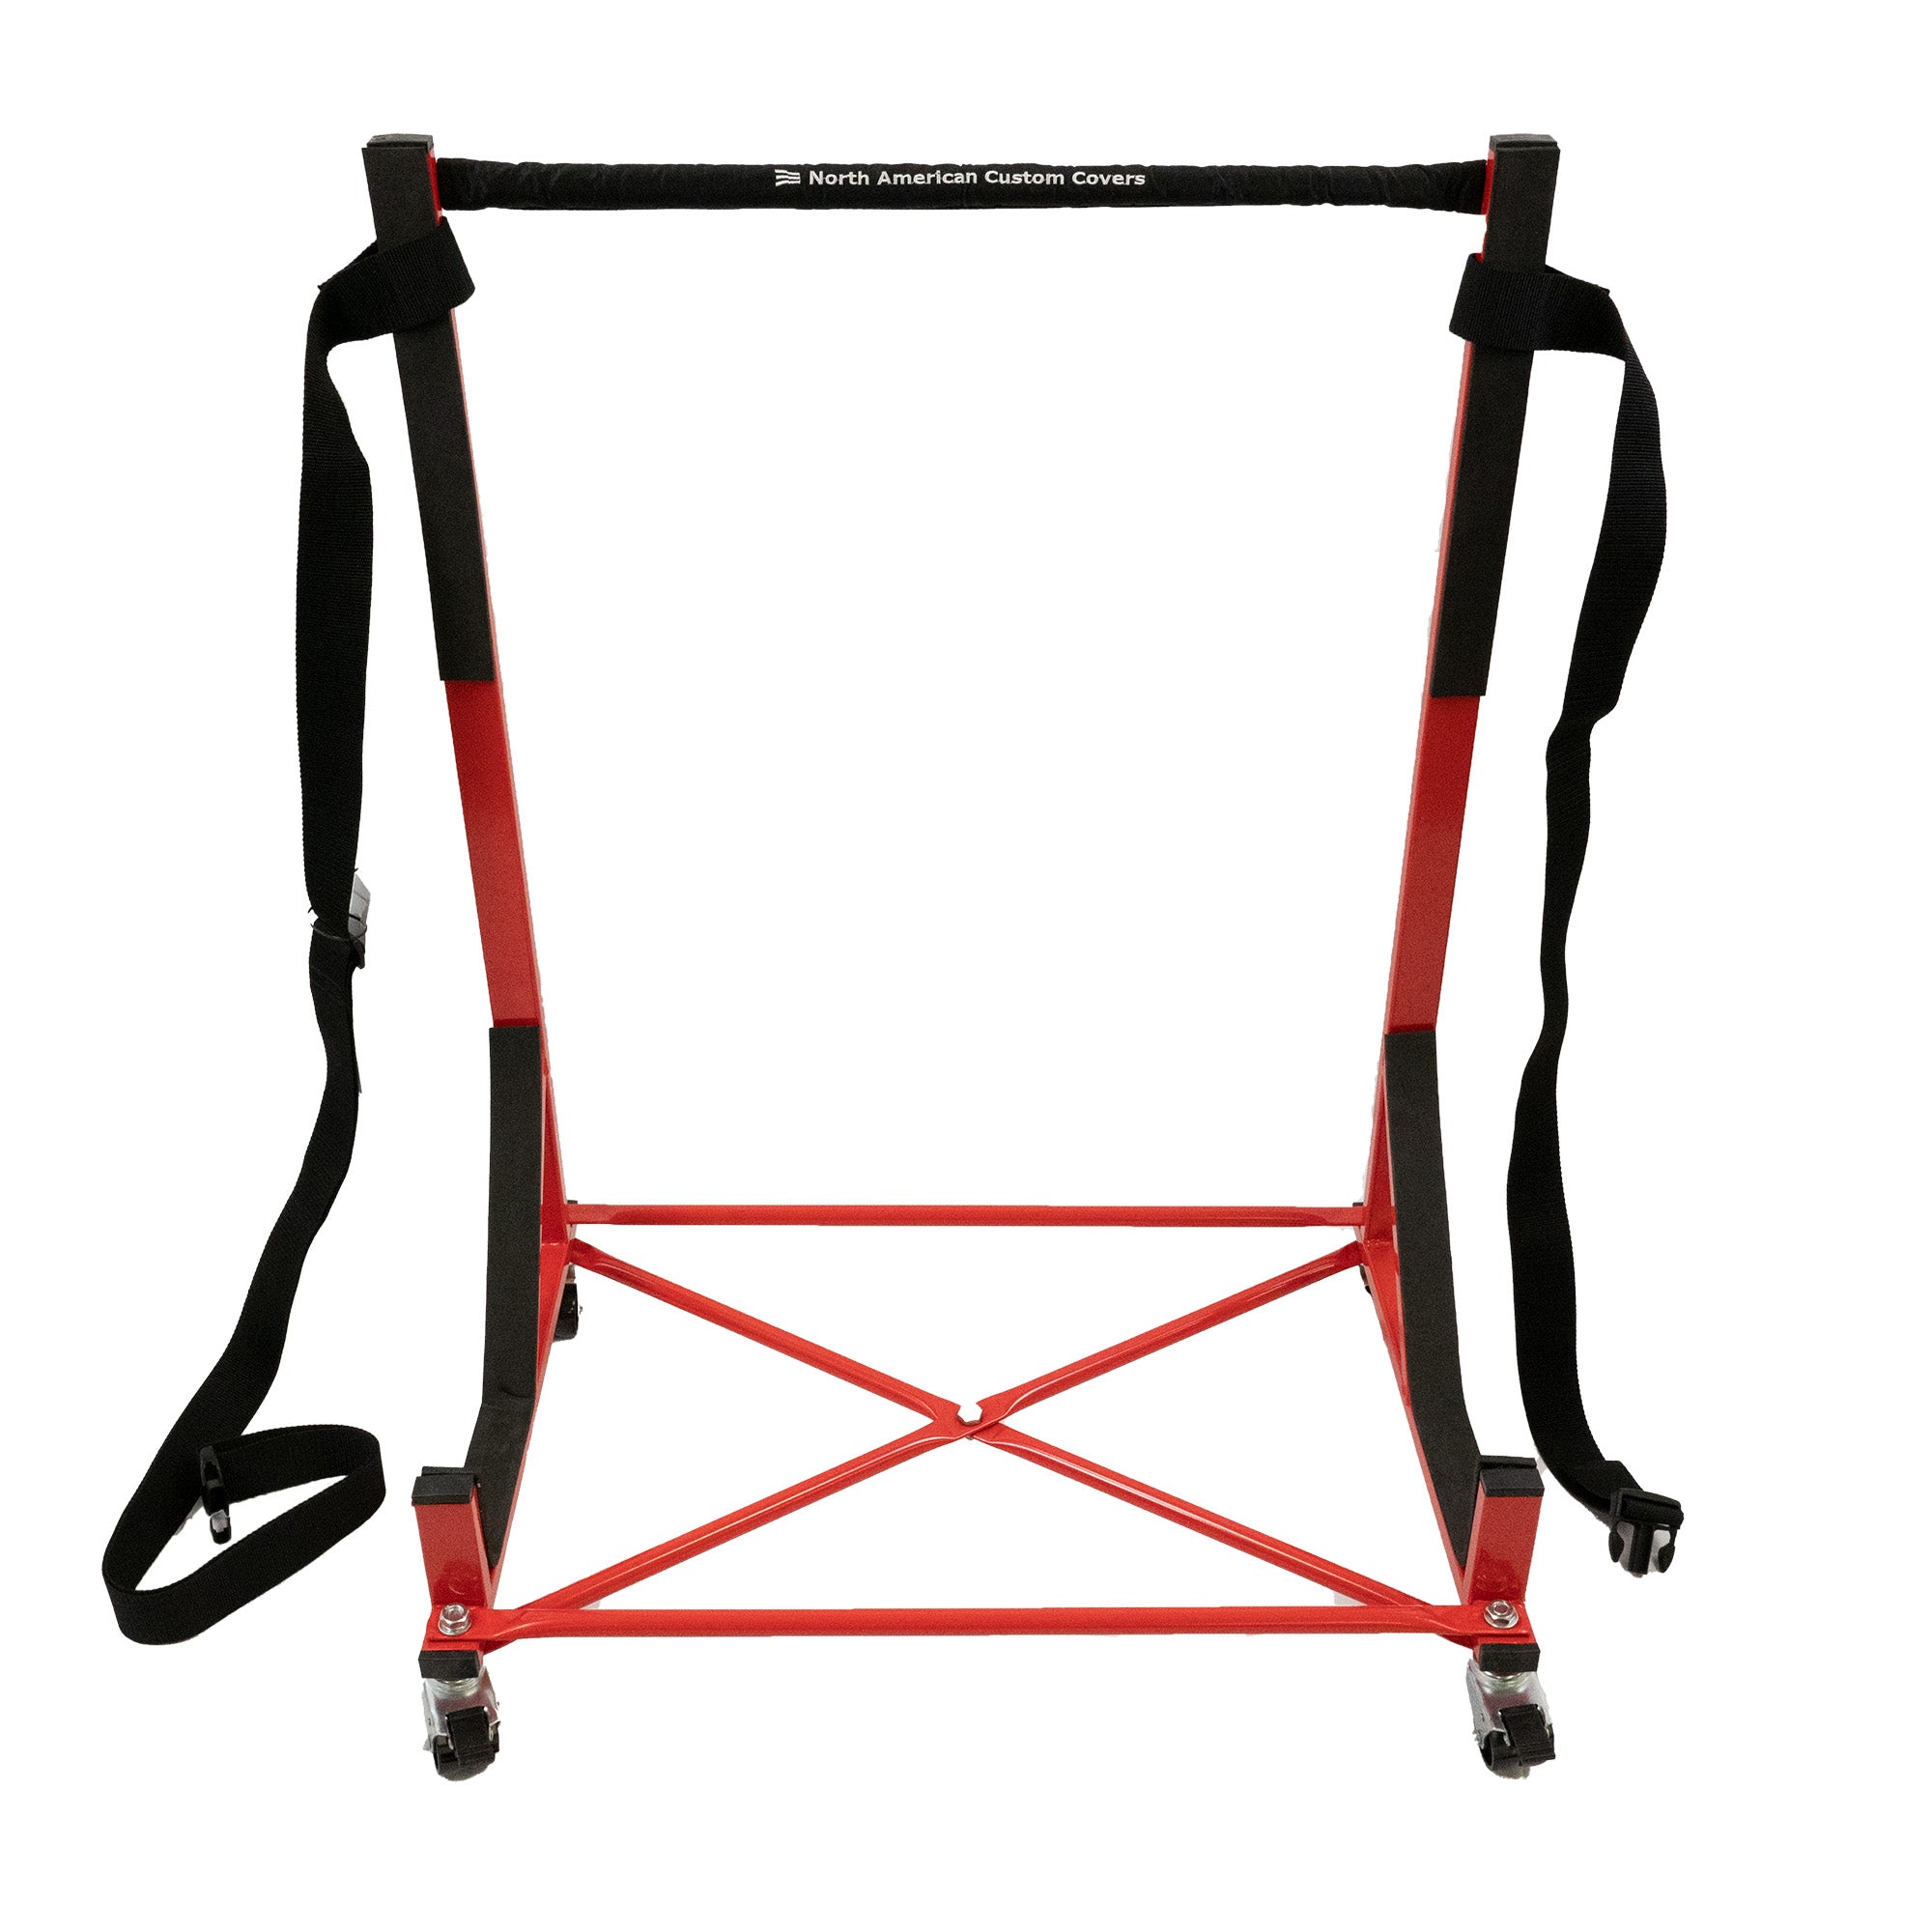 Plymouth Prowler Heavy-duty Hardtop Stand Trolley Cart Rack (Red) with Securing Harness and Hard Top Dust Cover (050R)